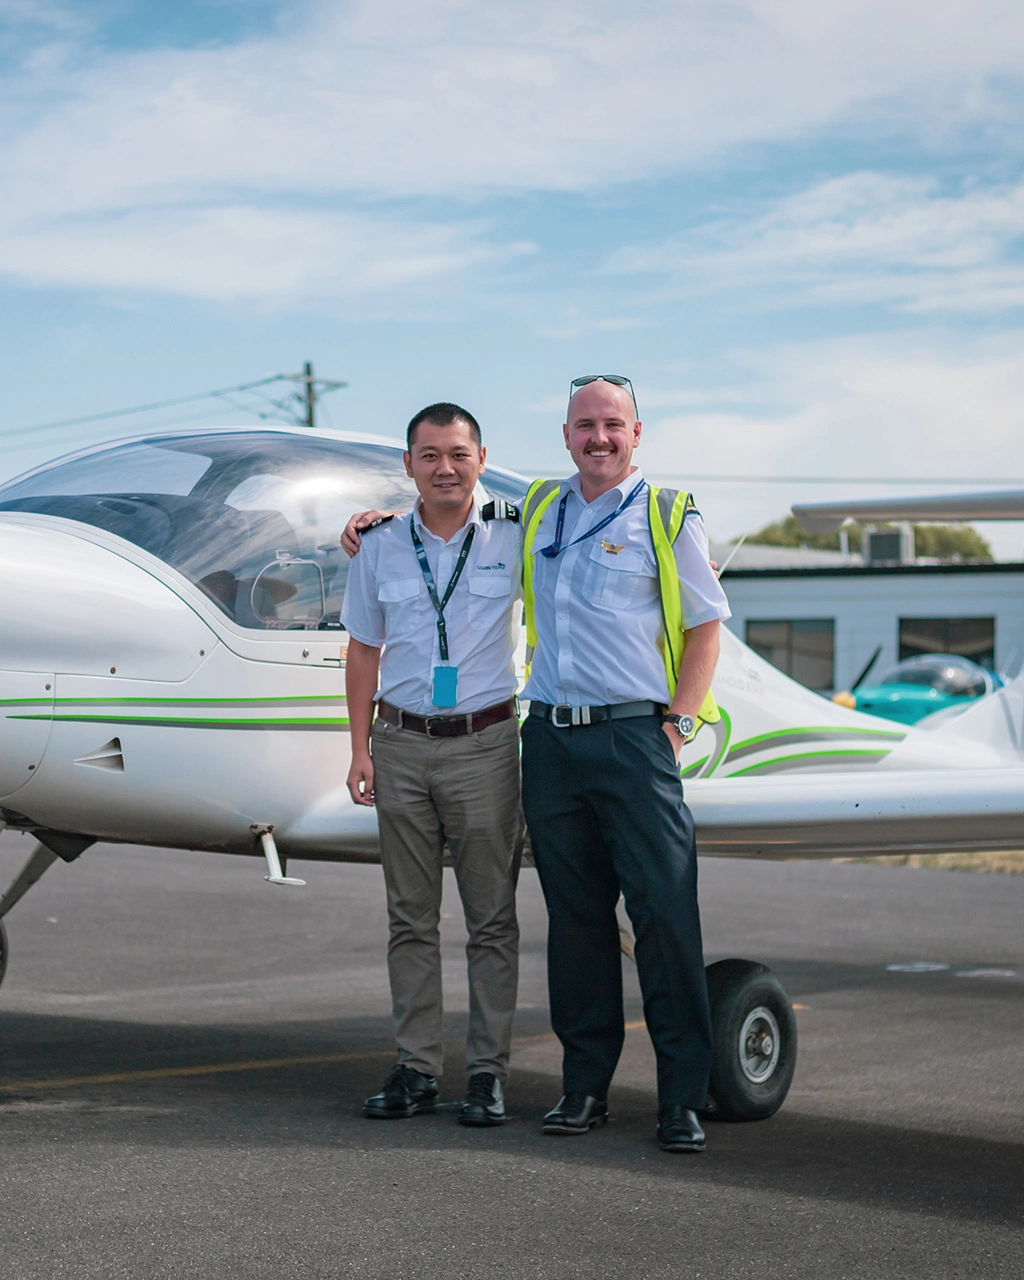 Flight Instructor Rating – A Flying Start To Your Pilot Career